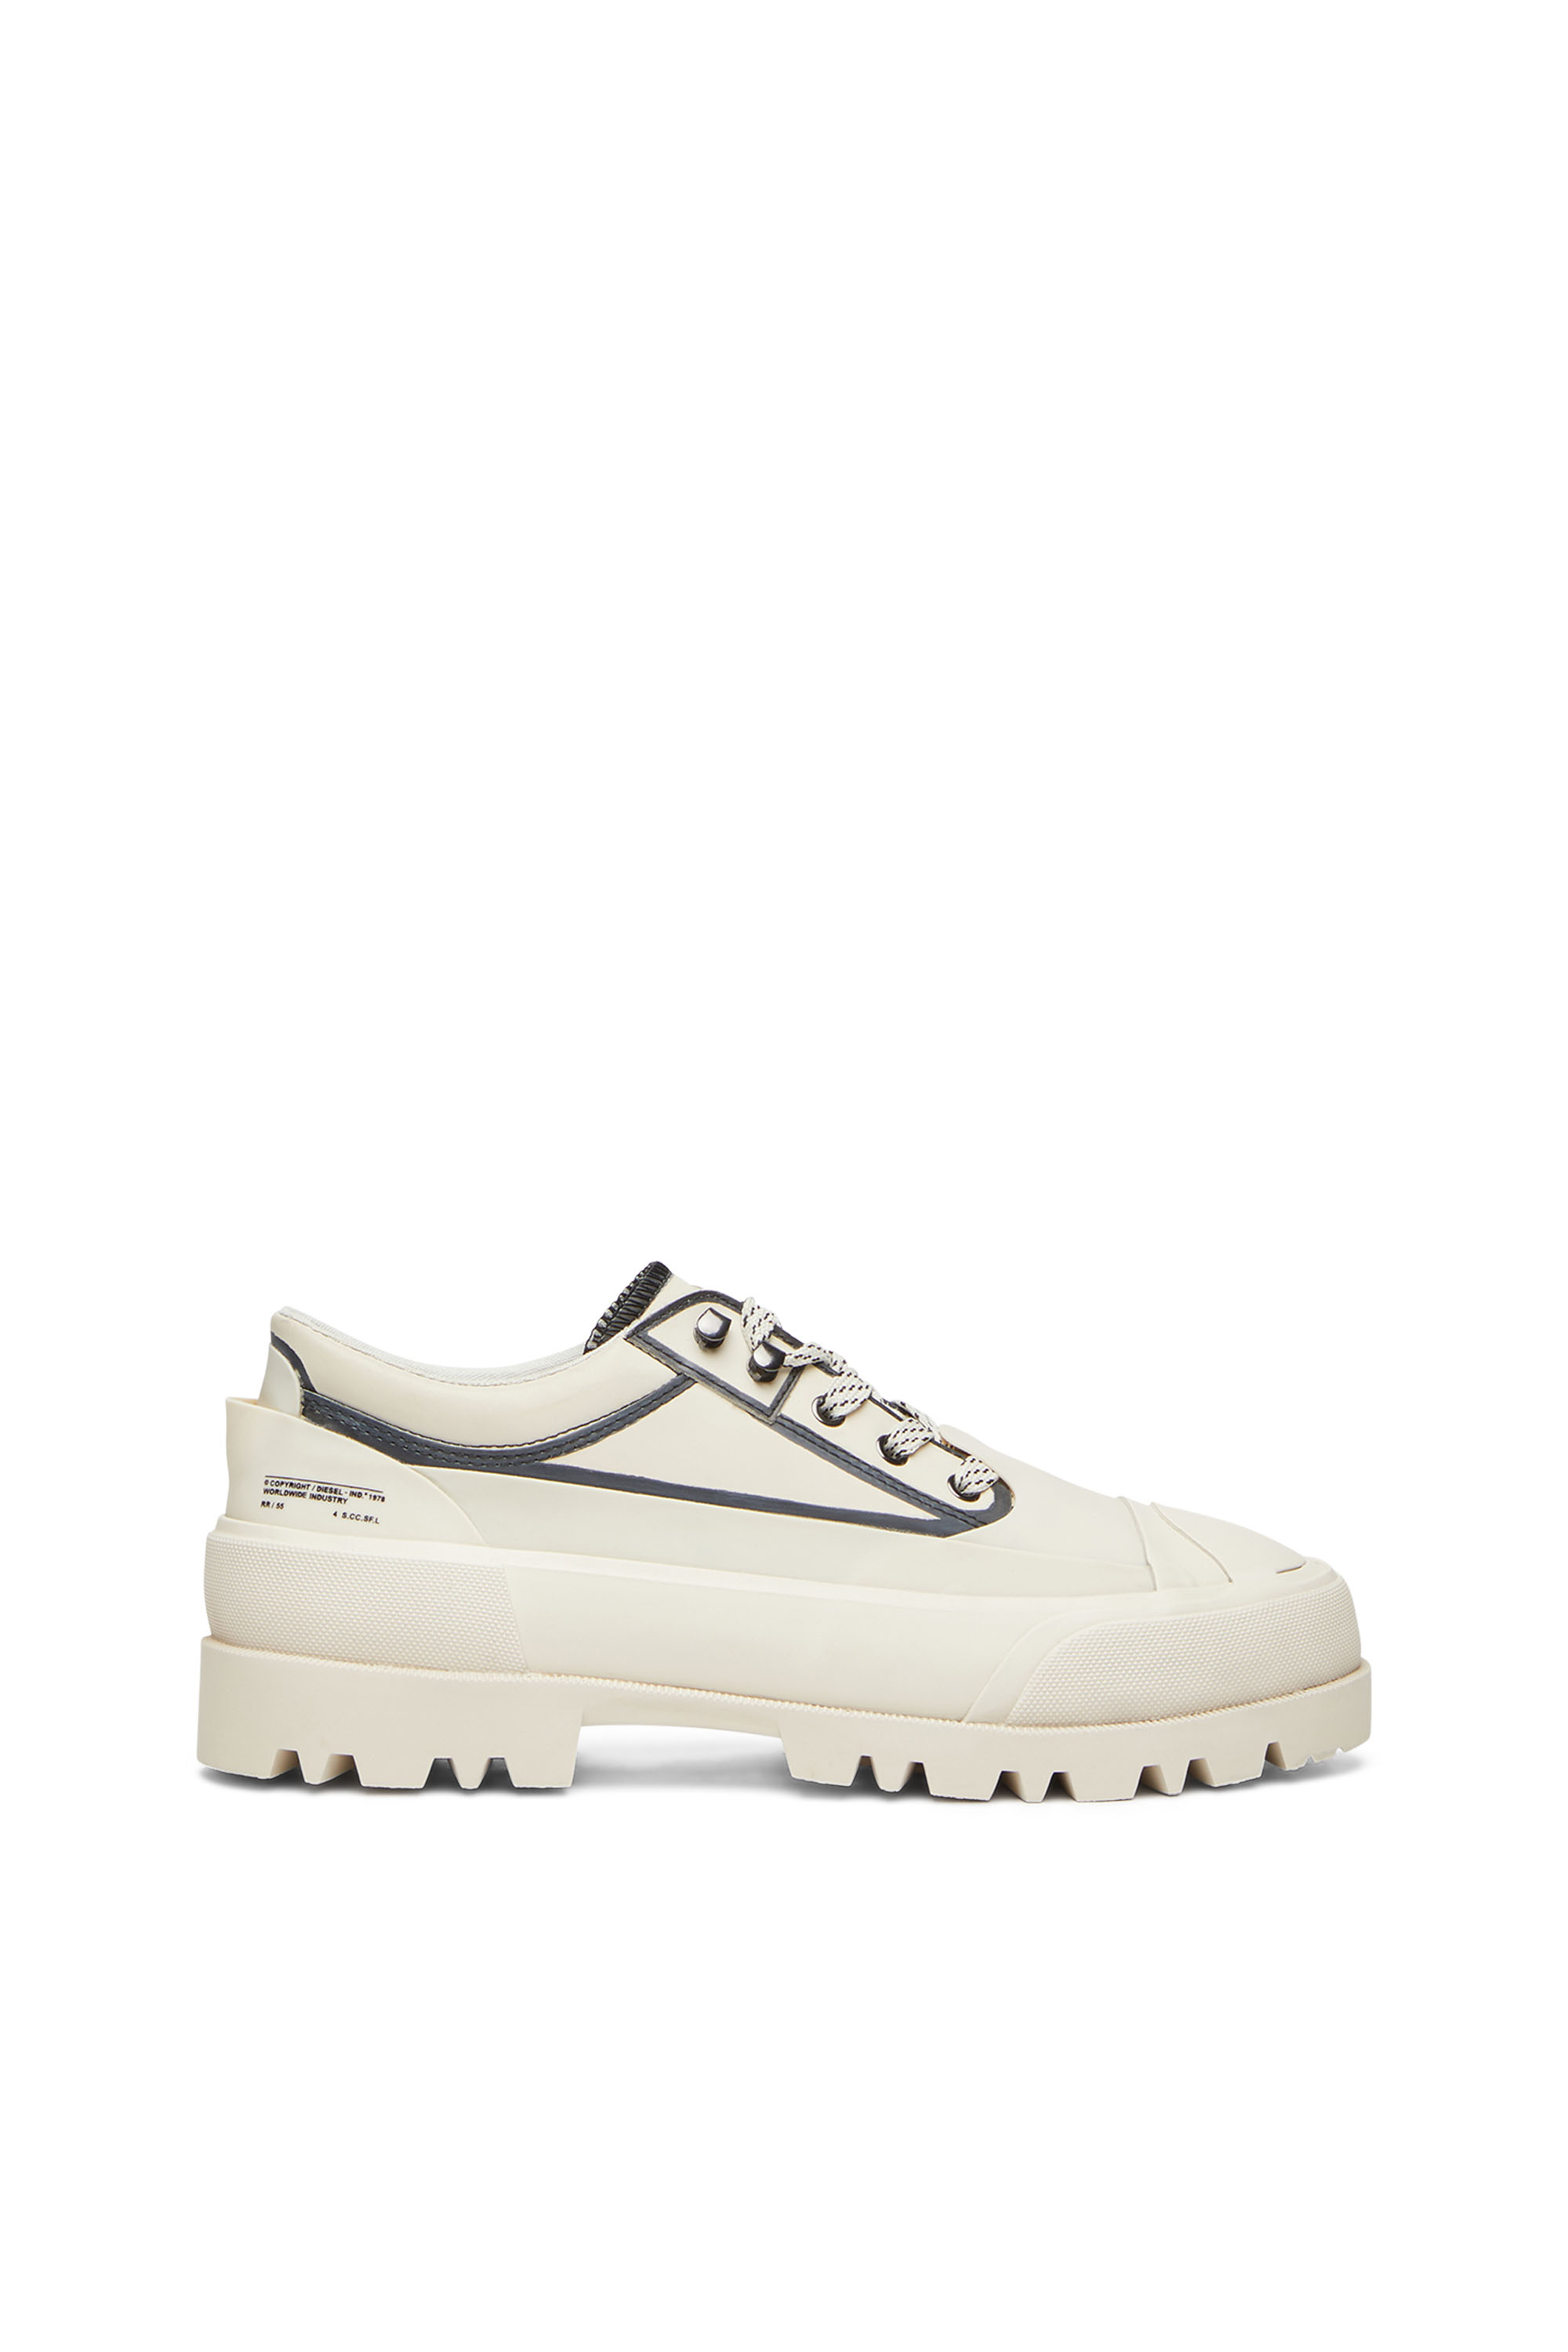 Diesel Combat Shoe In Leather And Rubber In Multicolor